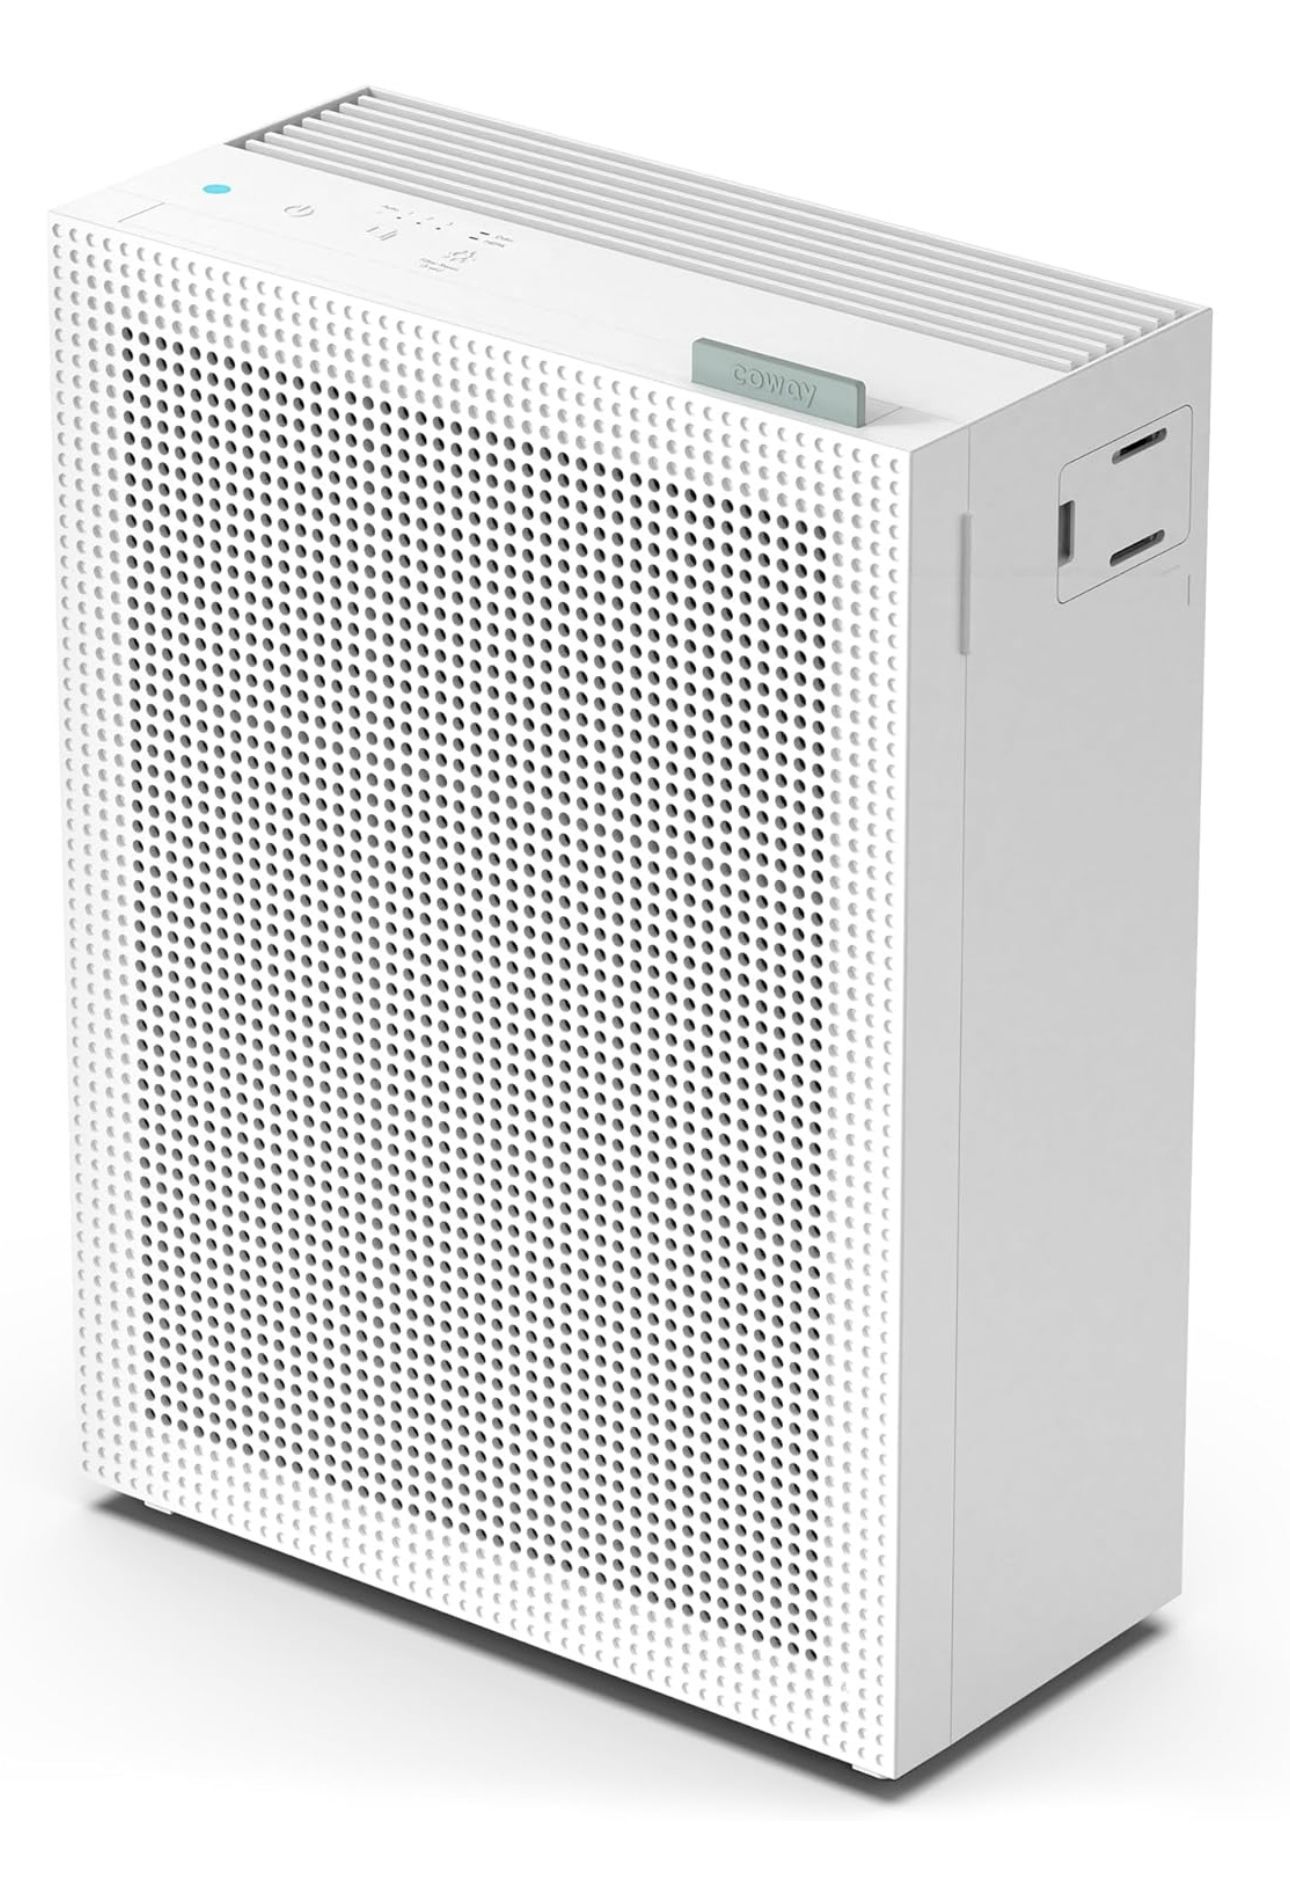 Coway Airmega 150 True HEPA Air Purifier with Air Quality Monitoring, Auto Mode, Filter Indicator (Dove White)